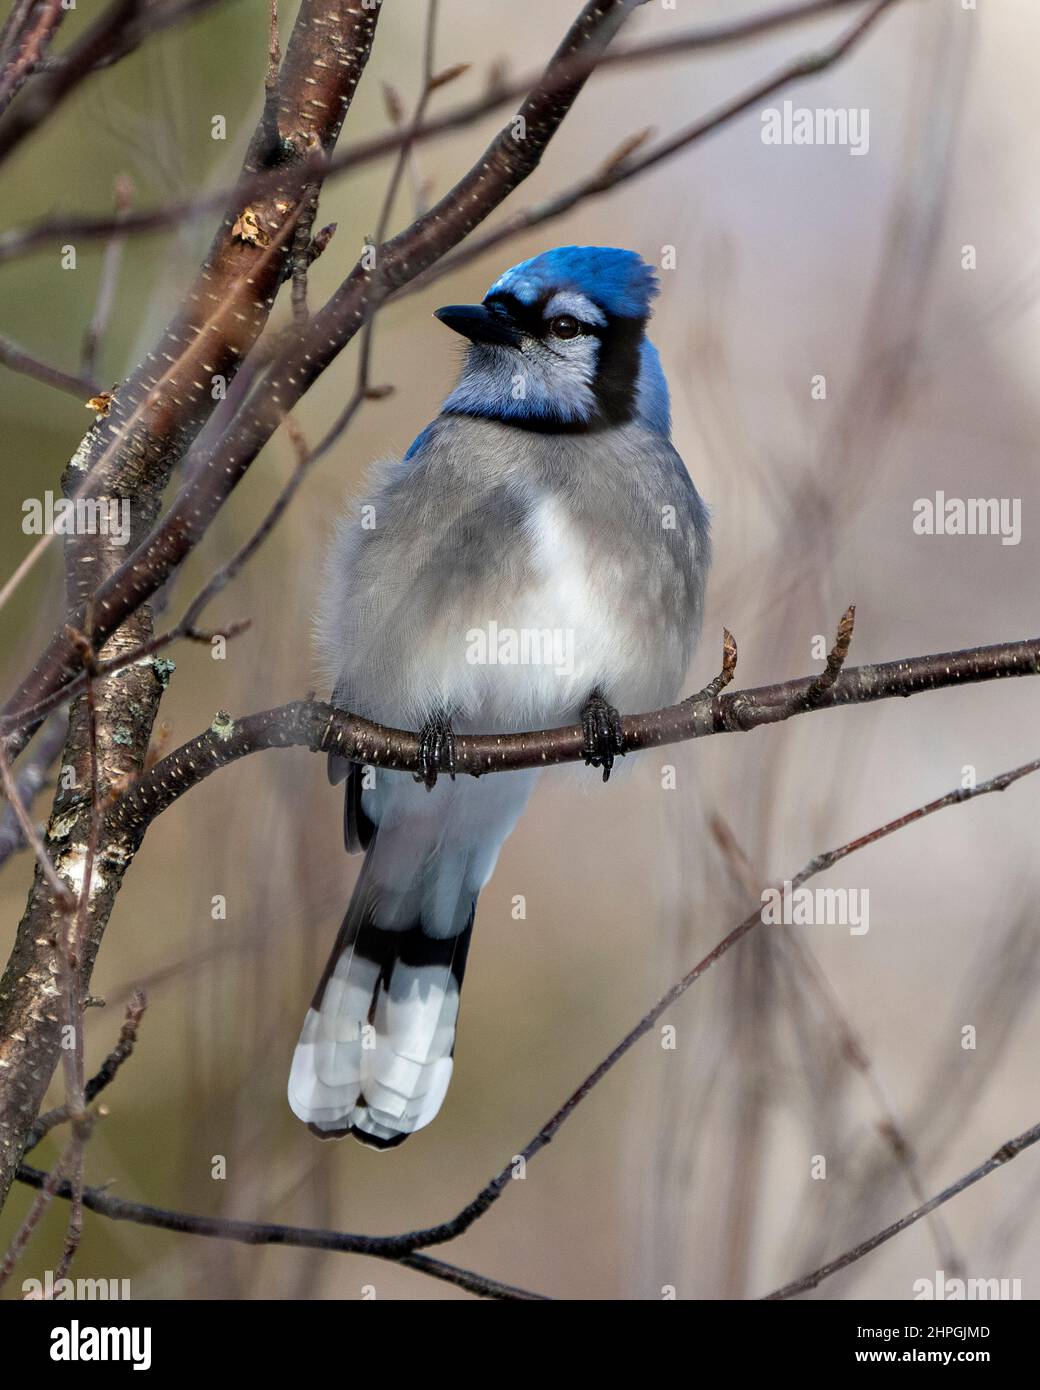 Blue Jay bird perched on a branch with a blur background in its environment and habitat surrounding displaying blue feather plumage. Jay bird. Stock Photo